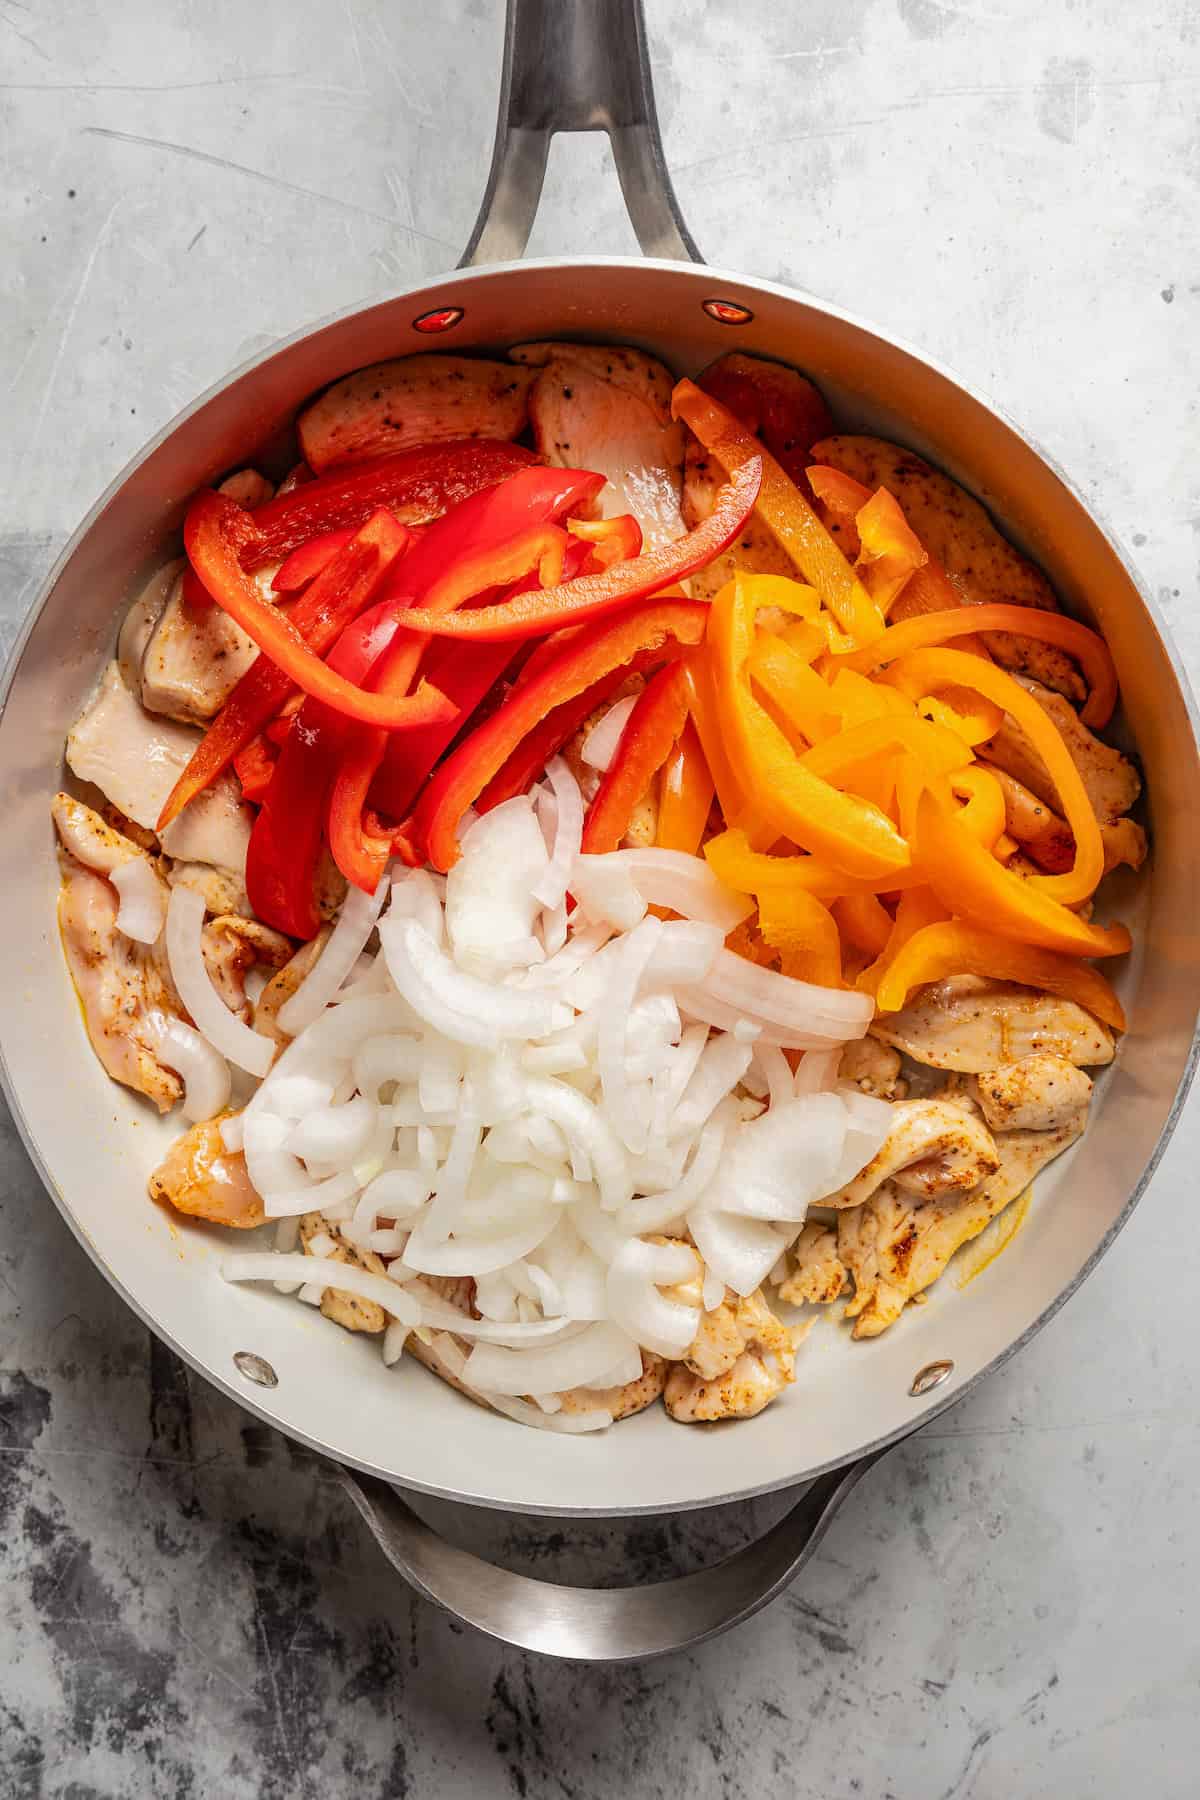 Sliced onions and red and orange bell peppers added to a skillet with cooked chicken.